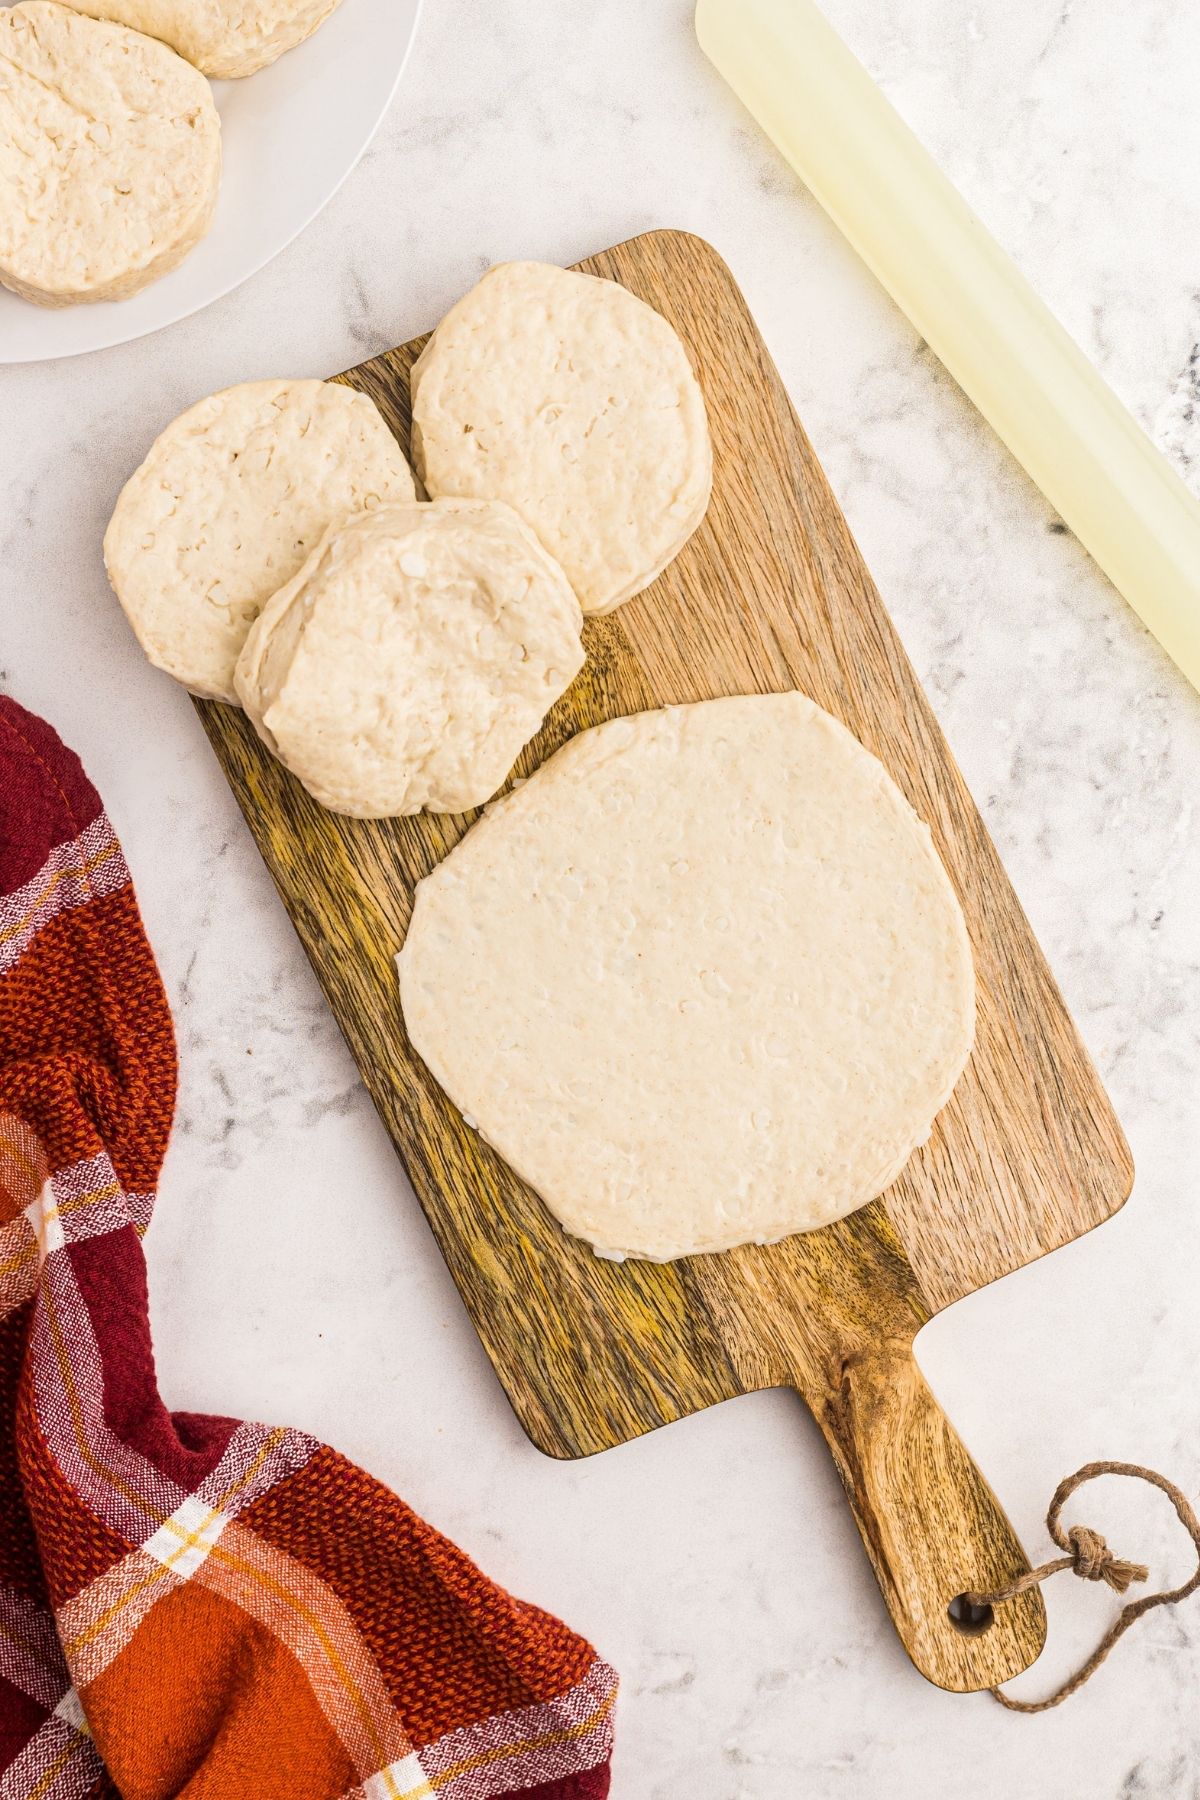 Rolled biscuit dough on a wooden cutting board